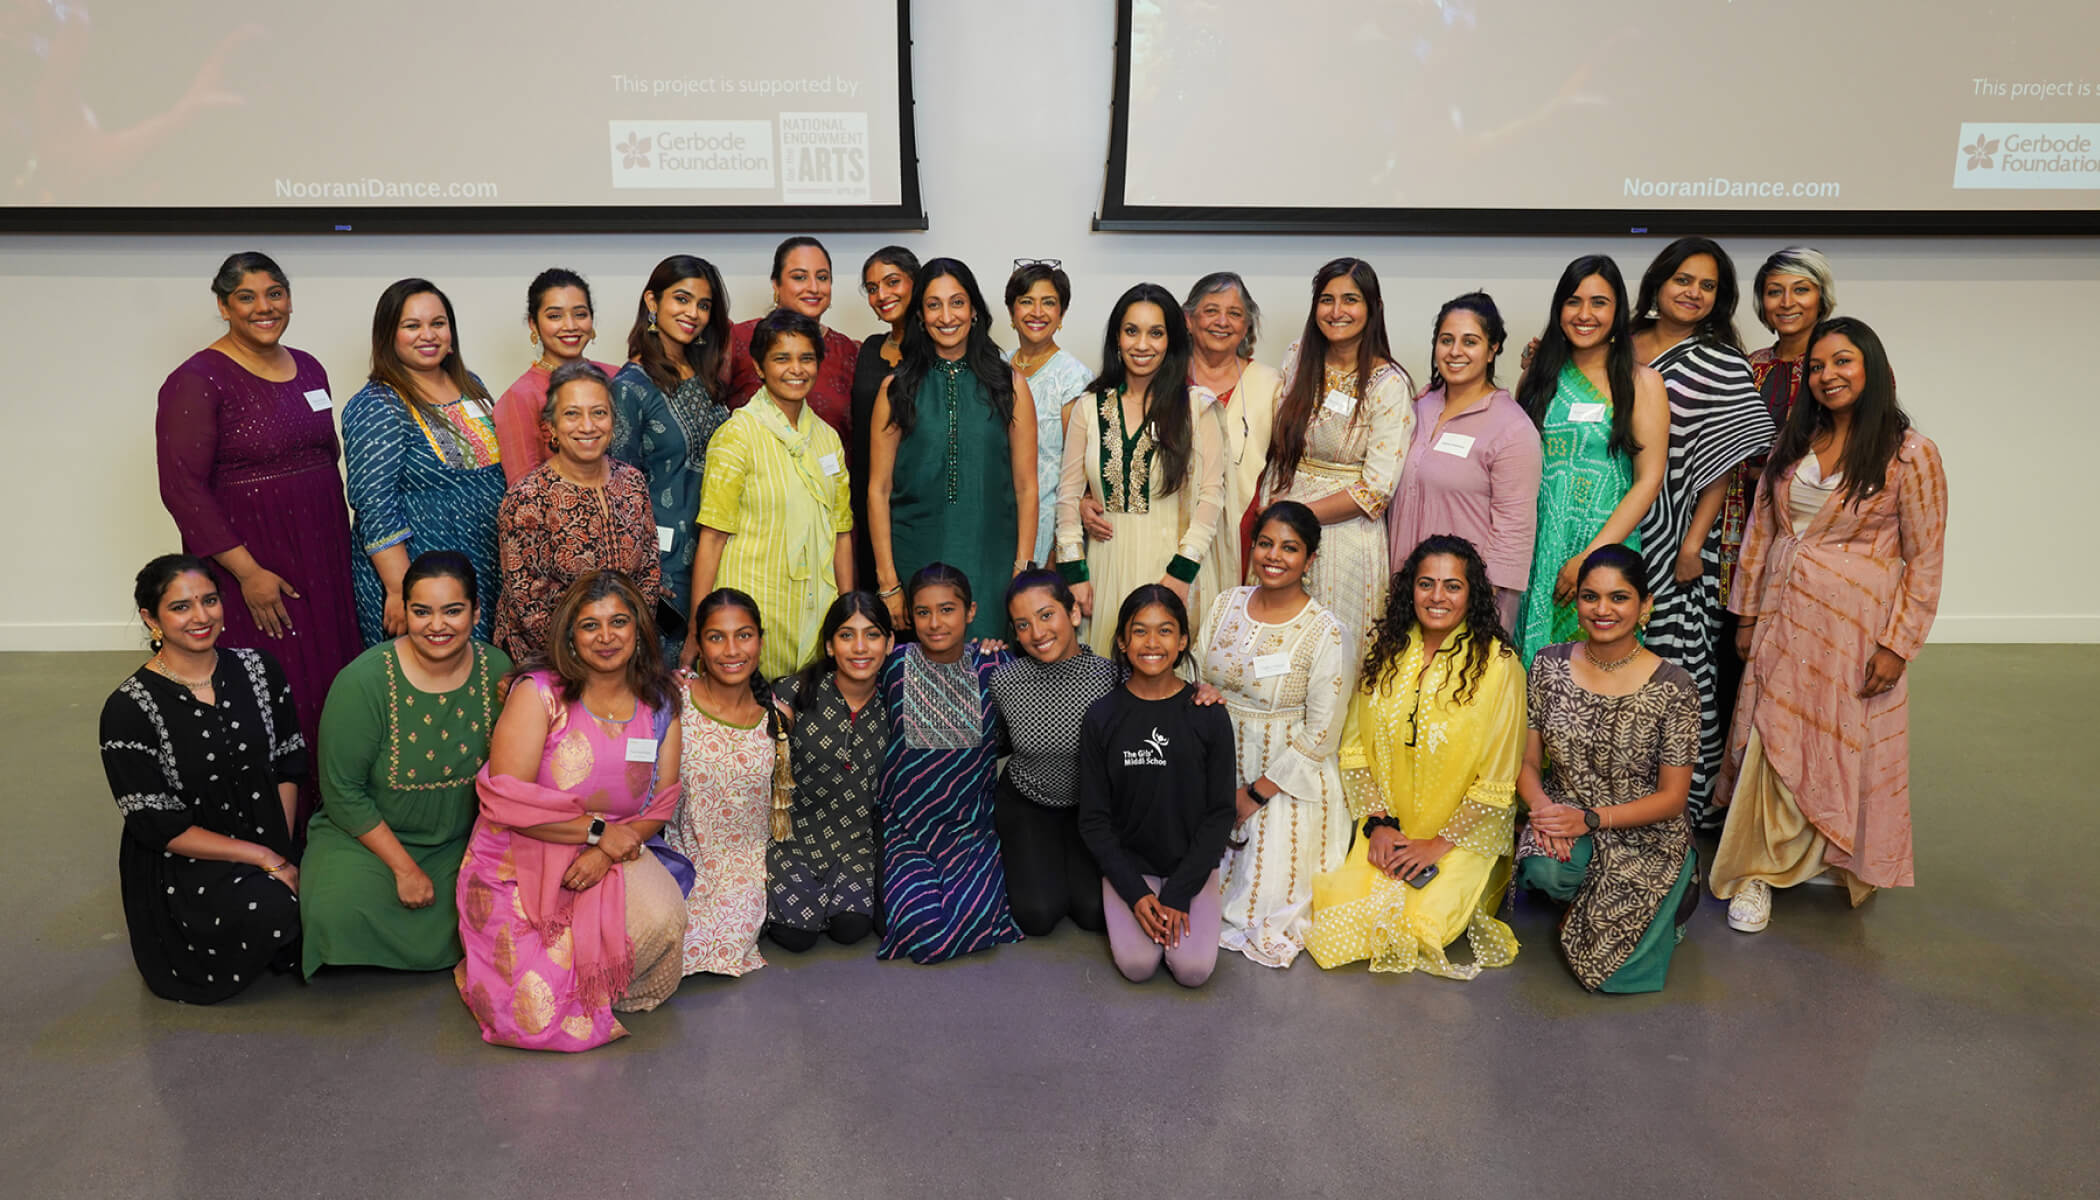 A large group of women in colorful traditional South Asian attire pose for a photo in front of two large screens.